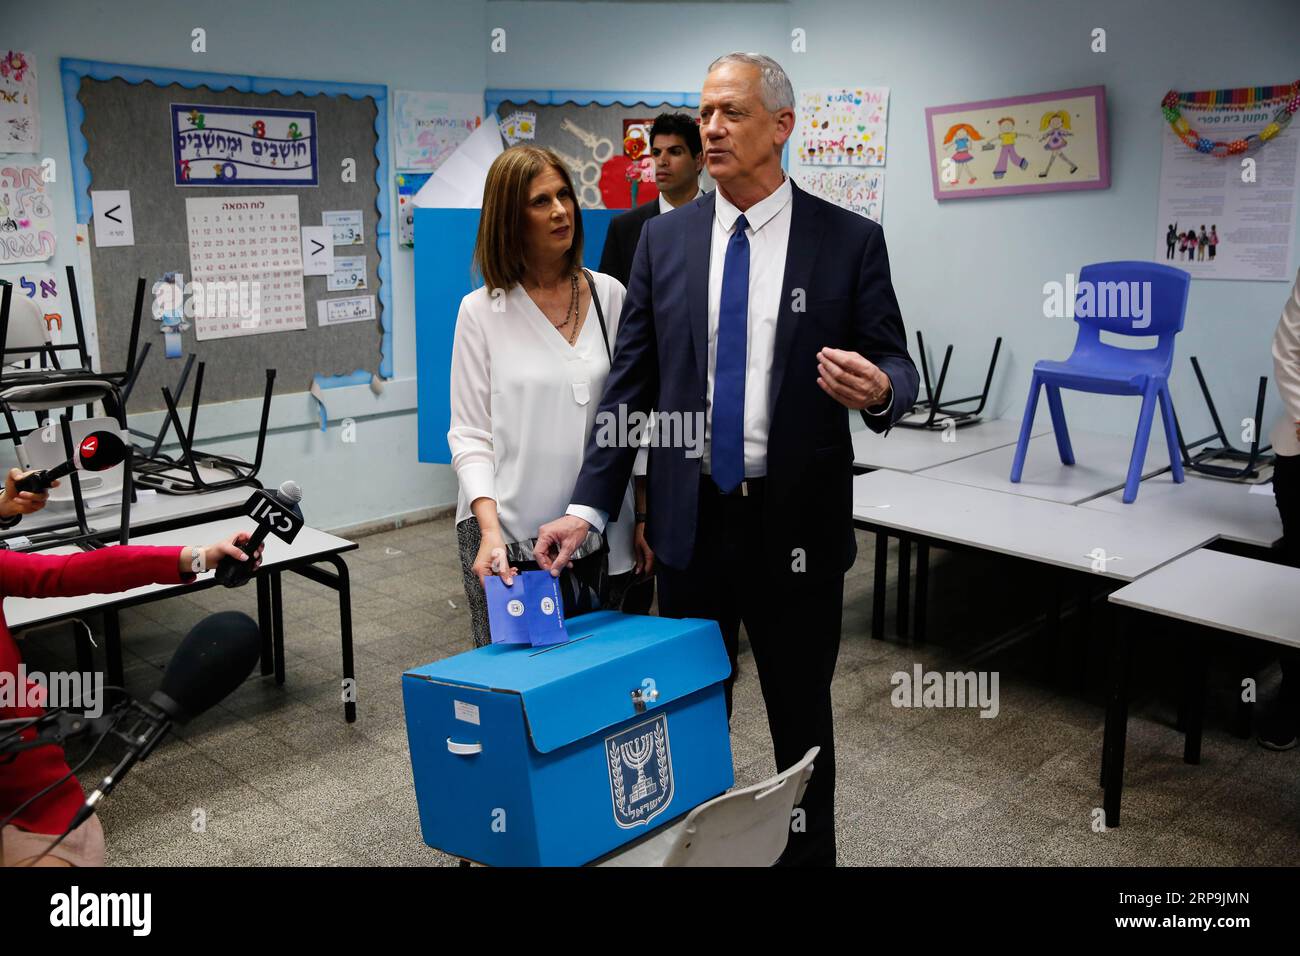 (190409) -- ROSH HAAYIN, April 9, 2019 -- Ex-army chief Benny Gantz (R), one of the leaders of the Blue and White party, and his wife Revital Gantz cast their votes in Rosh Haayin, near Tel Aviv, Israel, on April 9, 2019. Israel on Tuesday morning started day-long general elections across the country to choose its next parliament and decide the premiership. Gil Cohen Magen) ISRAEL-ROSH HAAYIN-ELECTION-VOTE-BENNY GANTZ guoyu PUBLICATIONxNOTxINxCHN Stock Photo